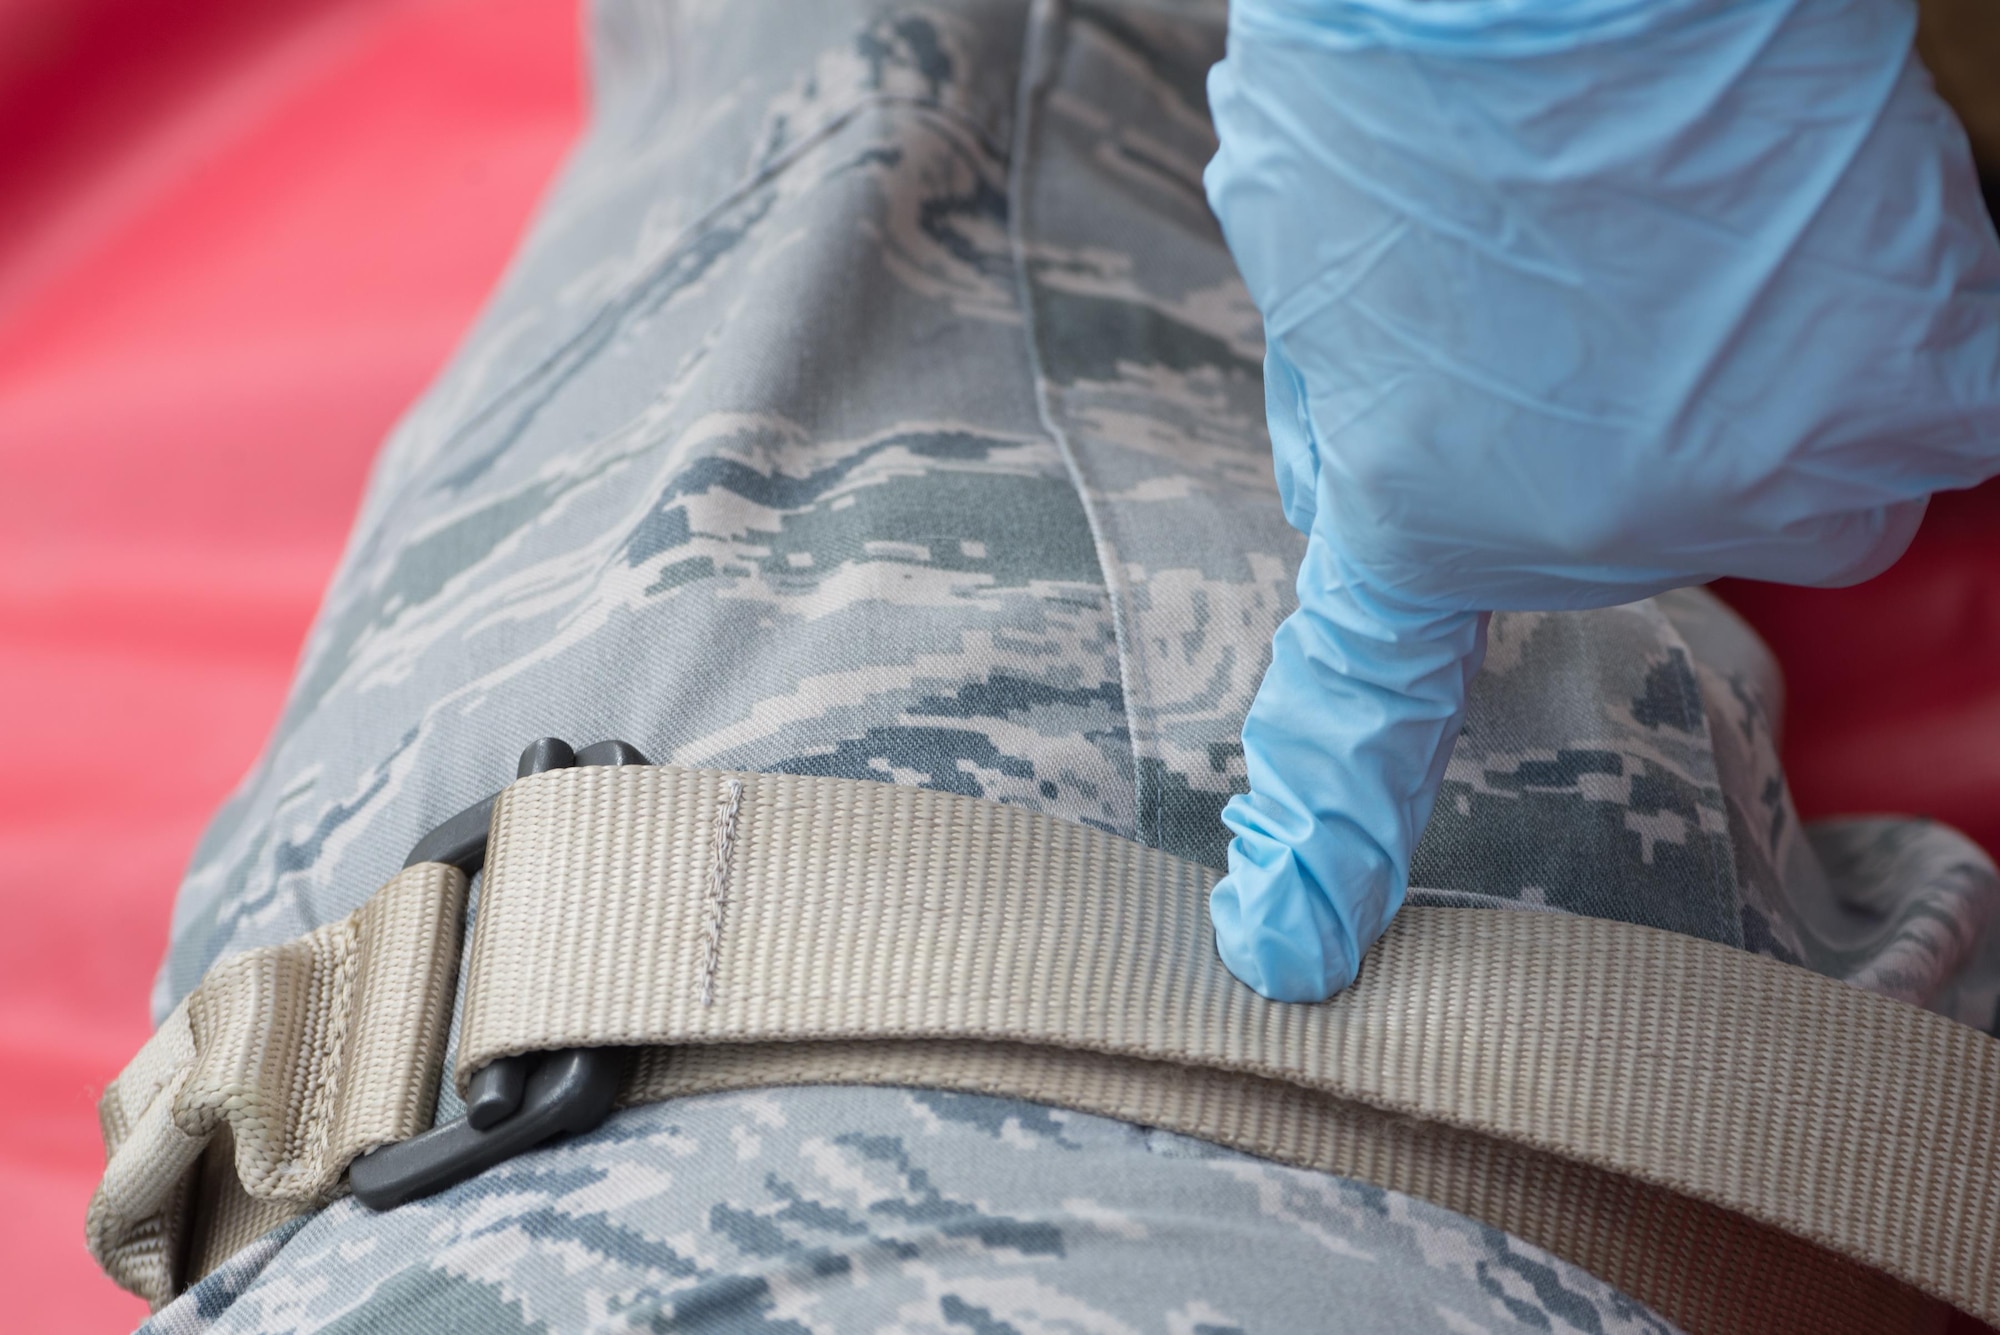 An emergency responder uses a belt to apply pressure to a simulated leg injury during an emergency management exercise May 11, 2017, at Andersen Air Force Base, Guam. The 36th Wing exercises regularly to ensure base personnel are trained and ready to respond quickly and accurately in the event of a crisis. (U.S. Air Force photo by Airman 1st Class Jacob Skovo)